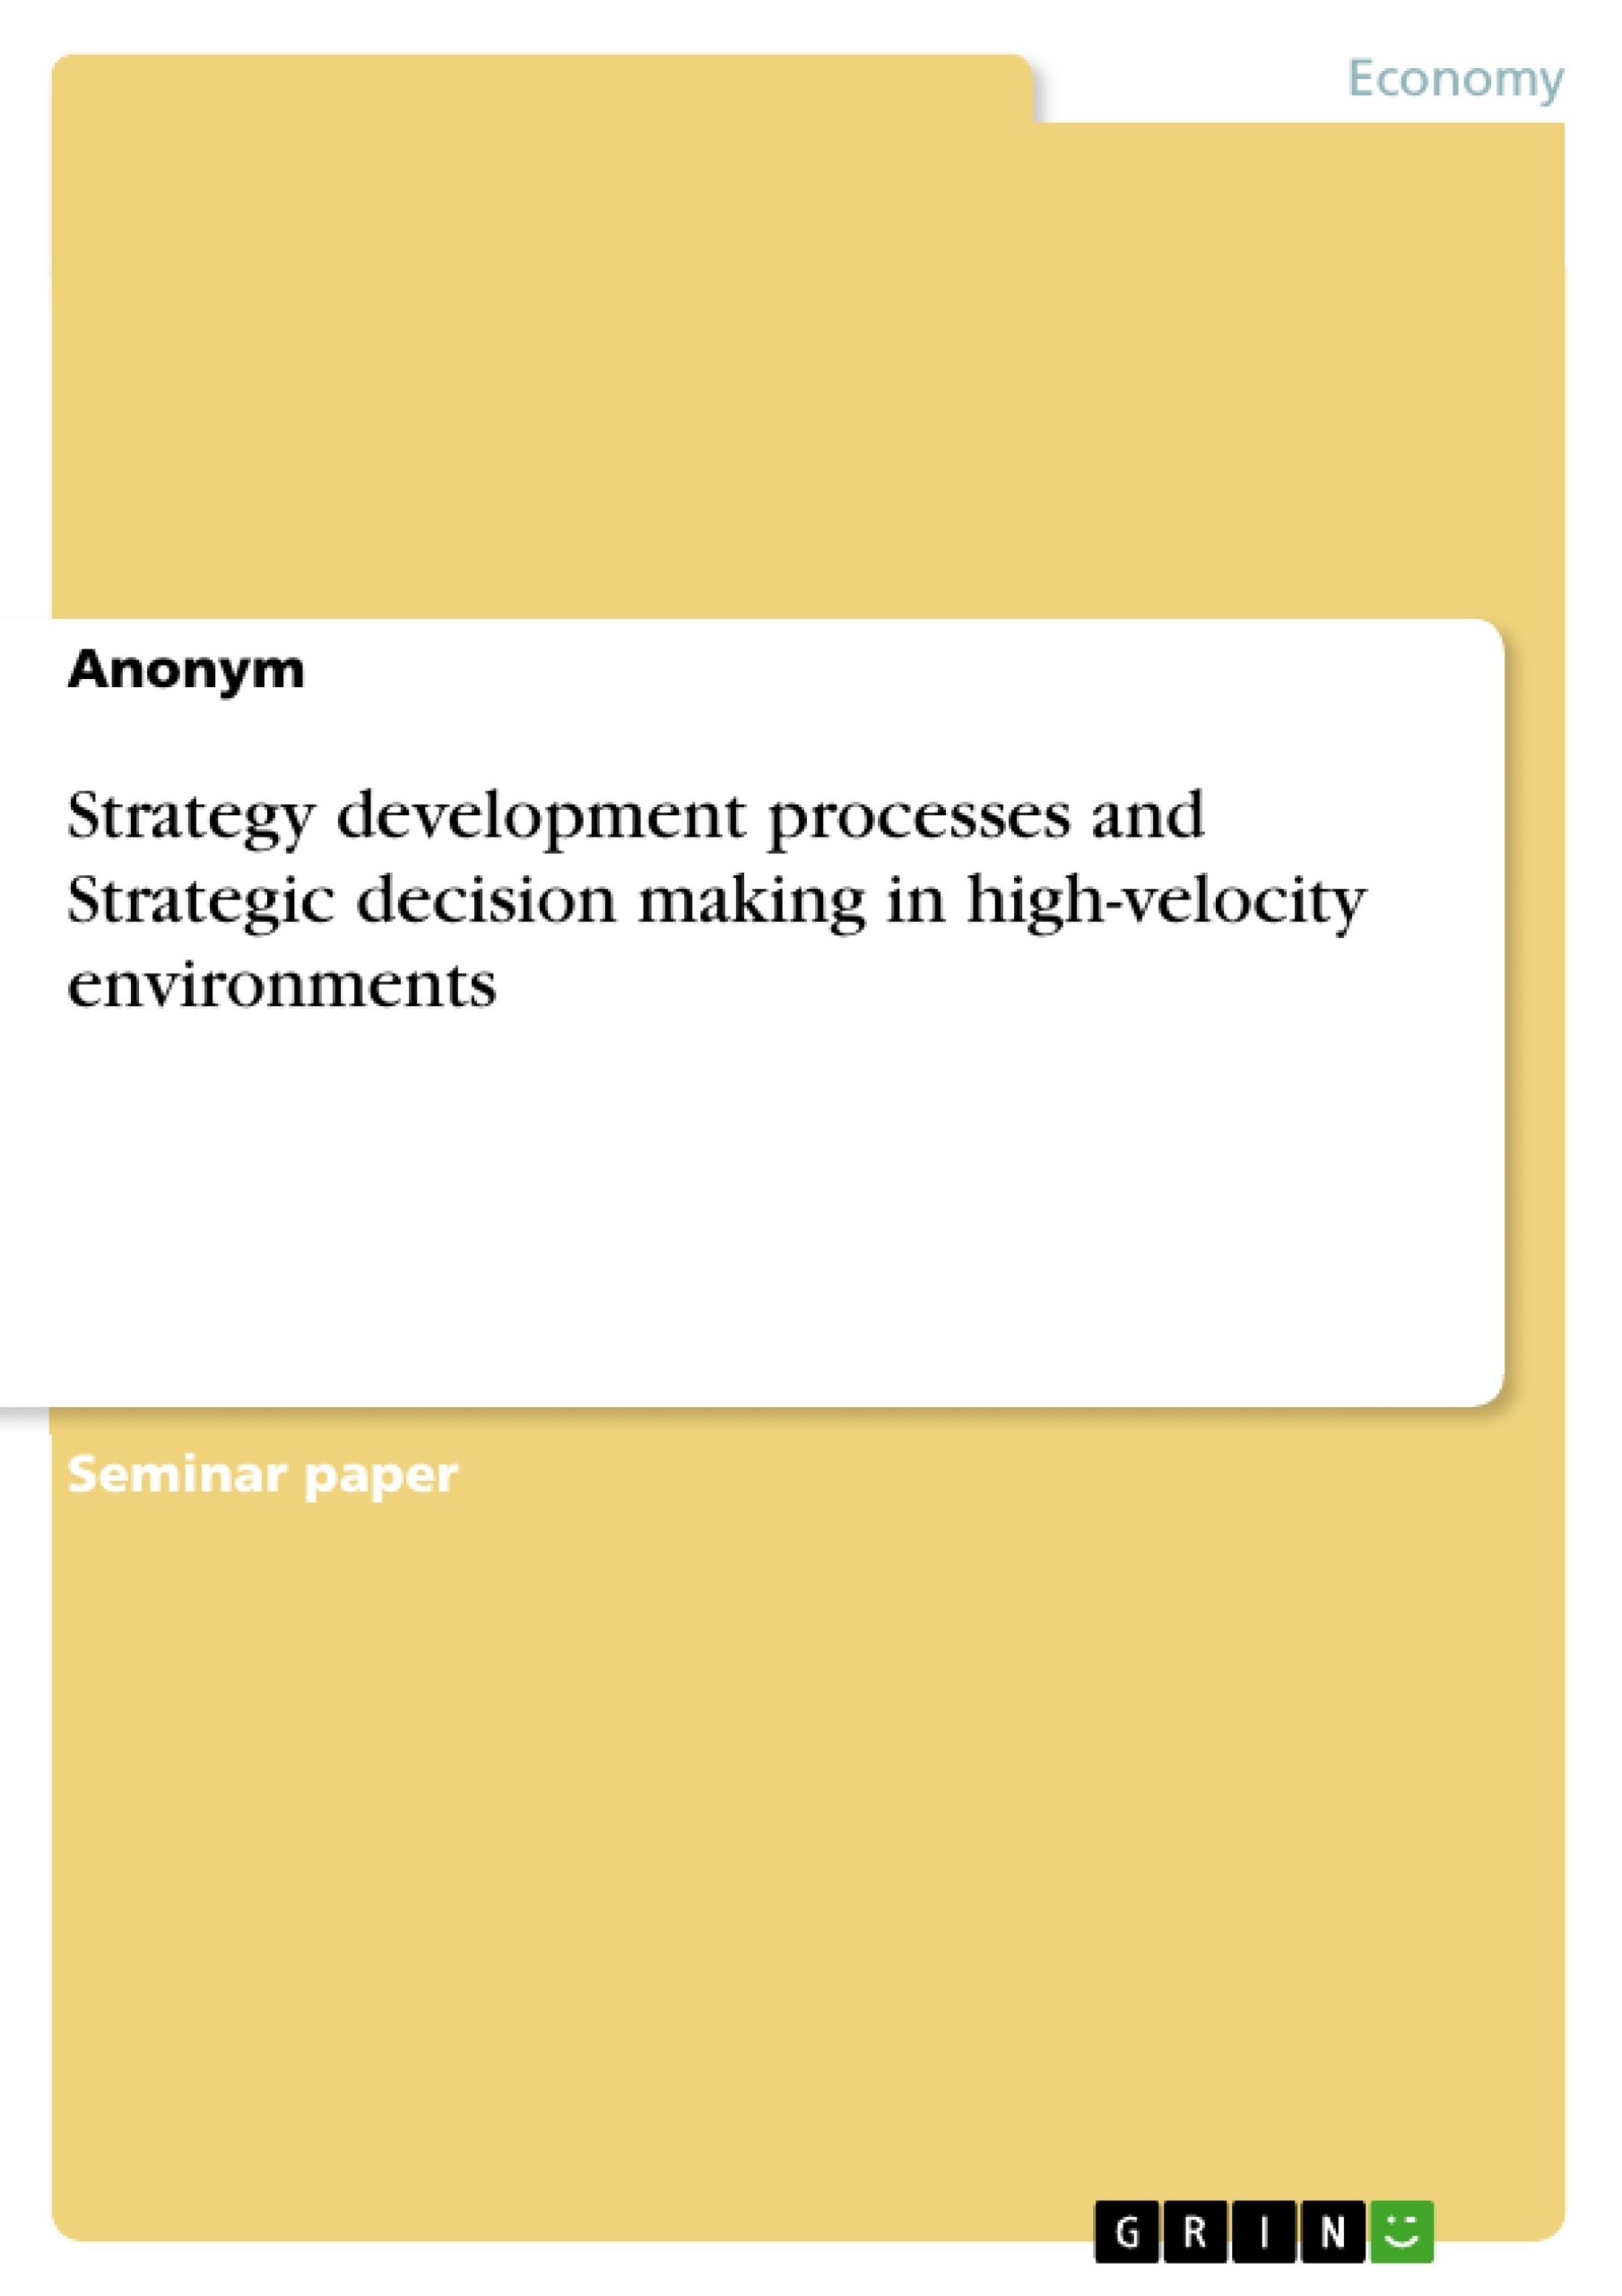 Title: Strategy development processes and Strategic decision making in high-velocity environments